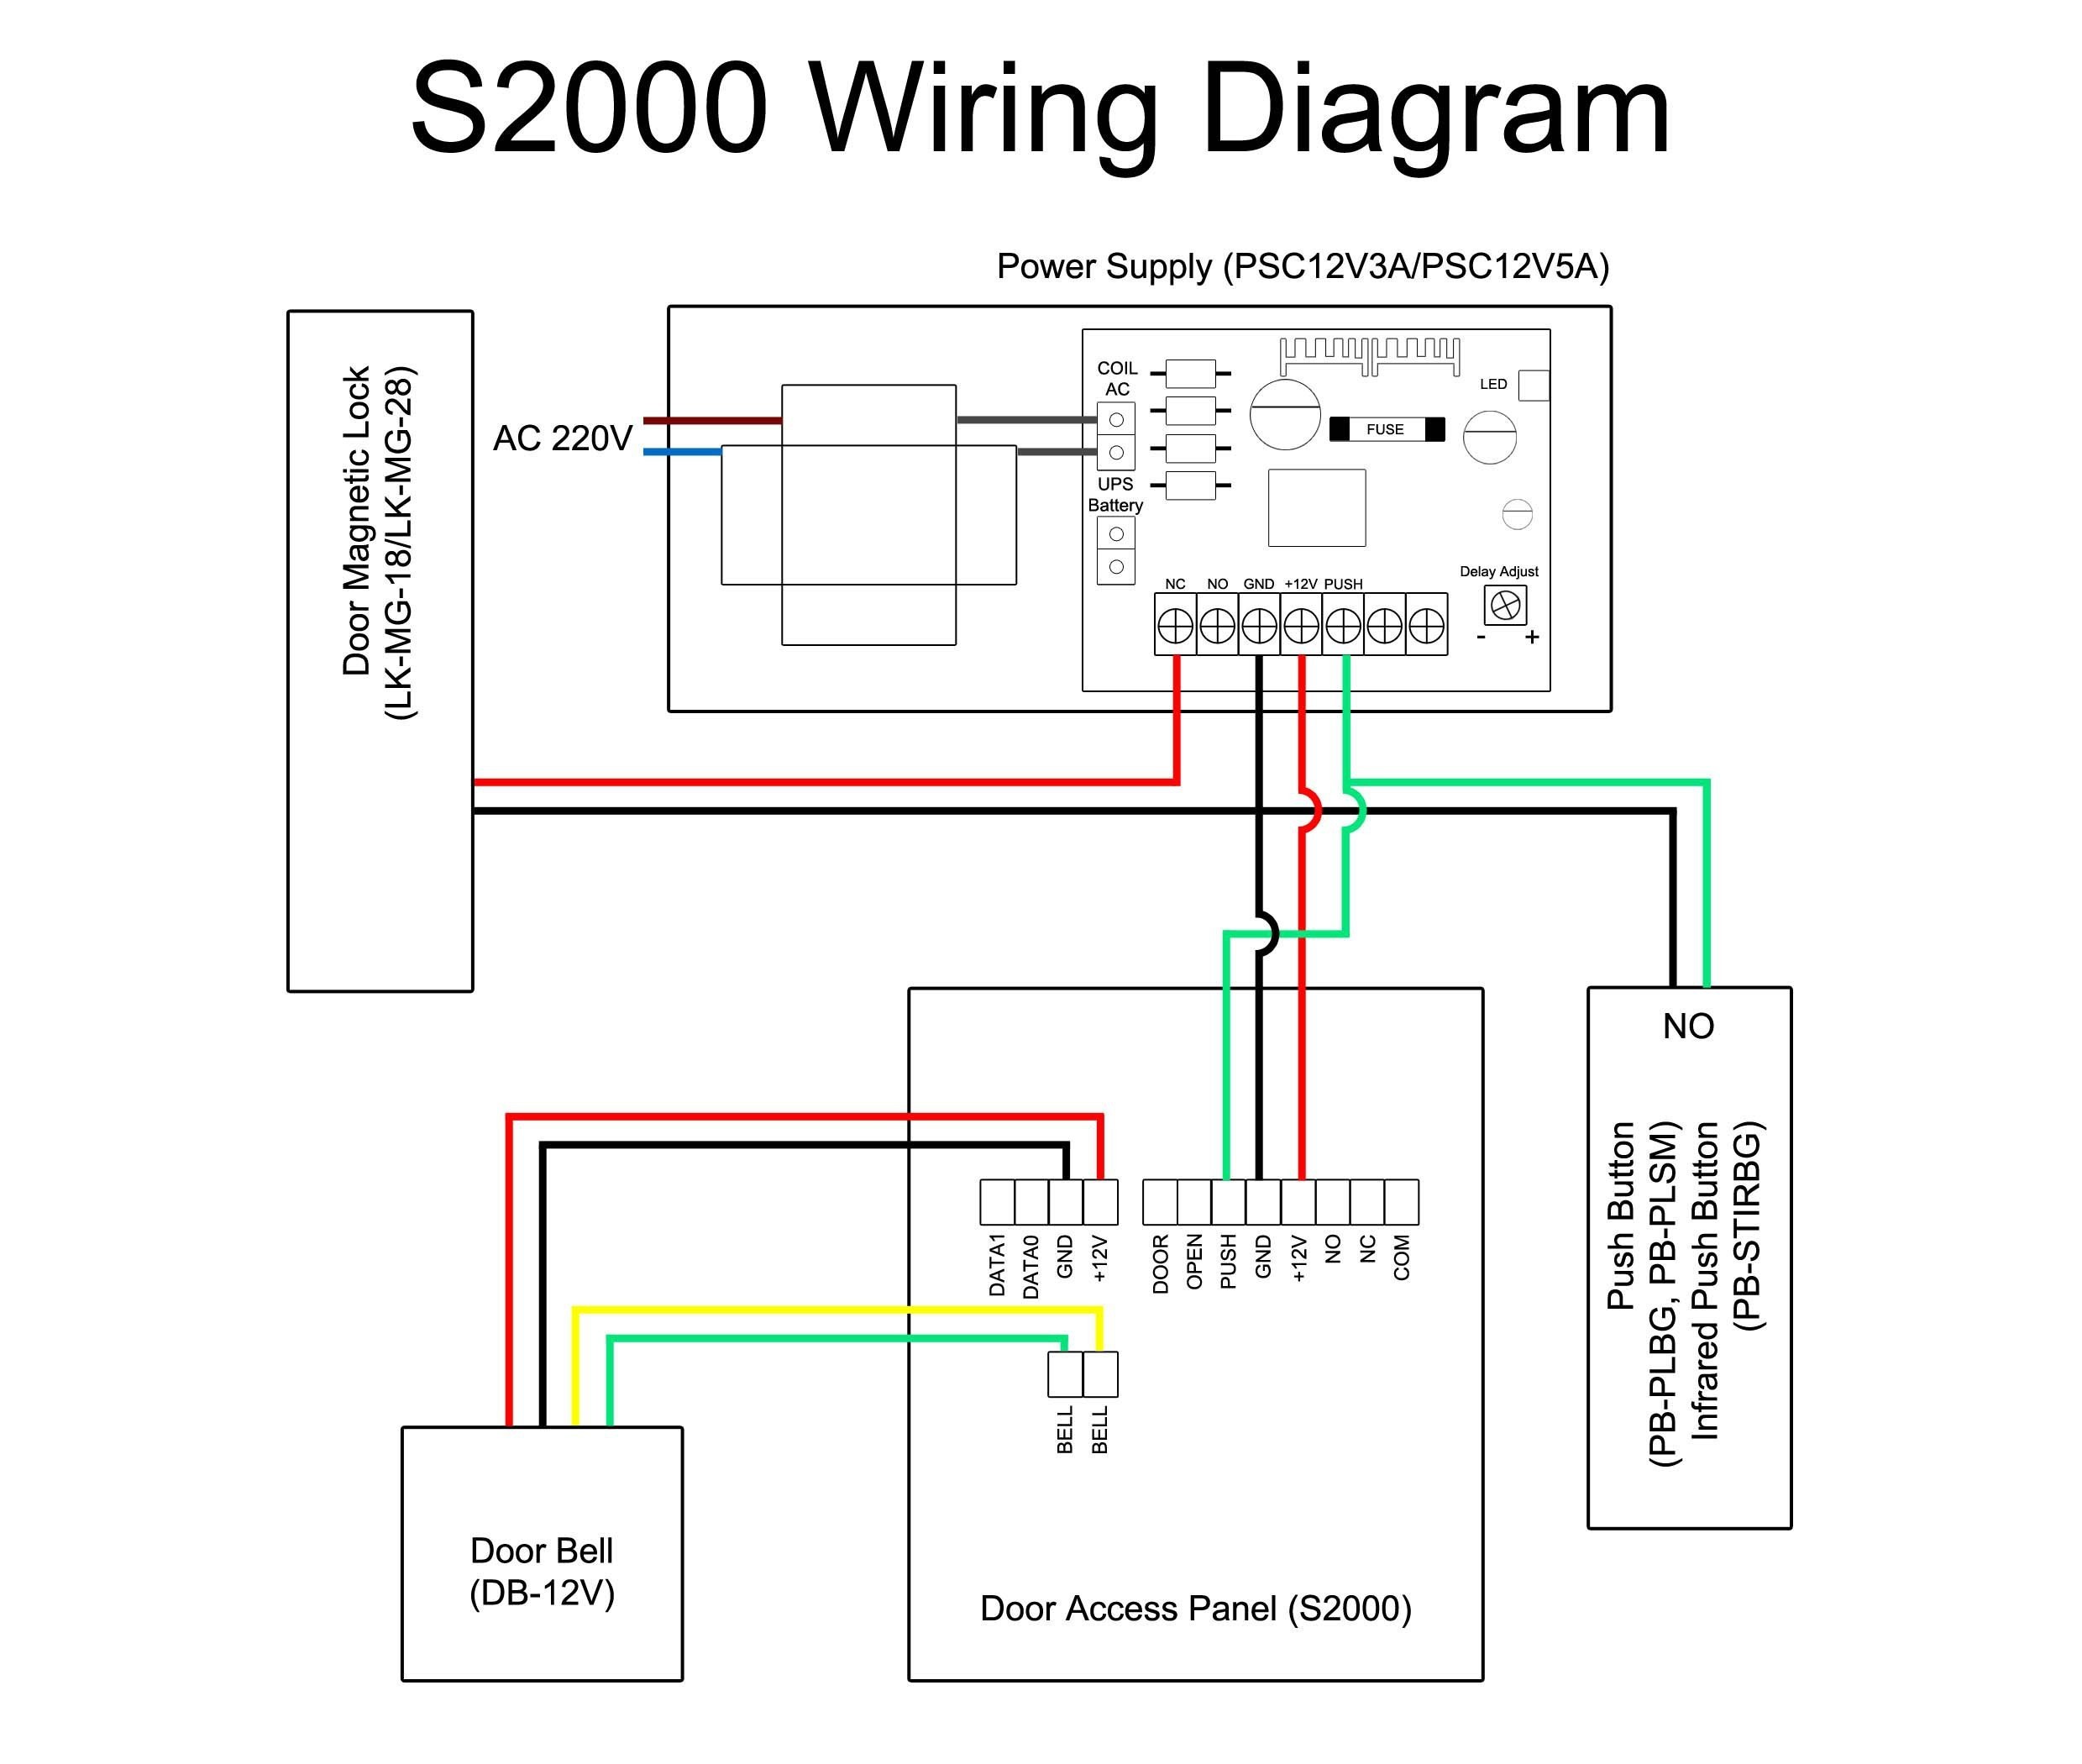 Home Cctv Wiring Diagram Save Harbor Freight Security Camera Wiring Diagram Valid Wiring Diagram